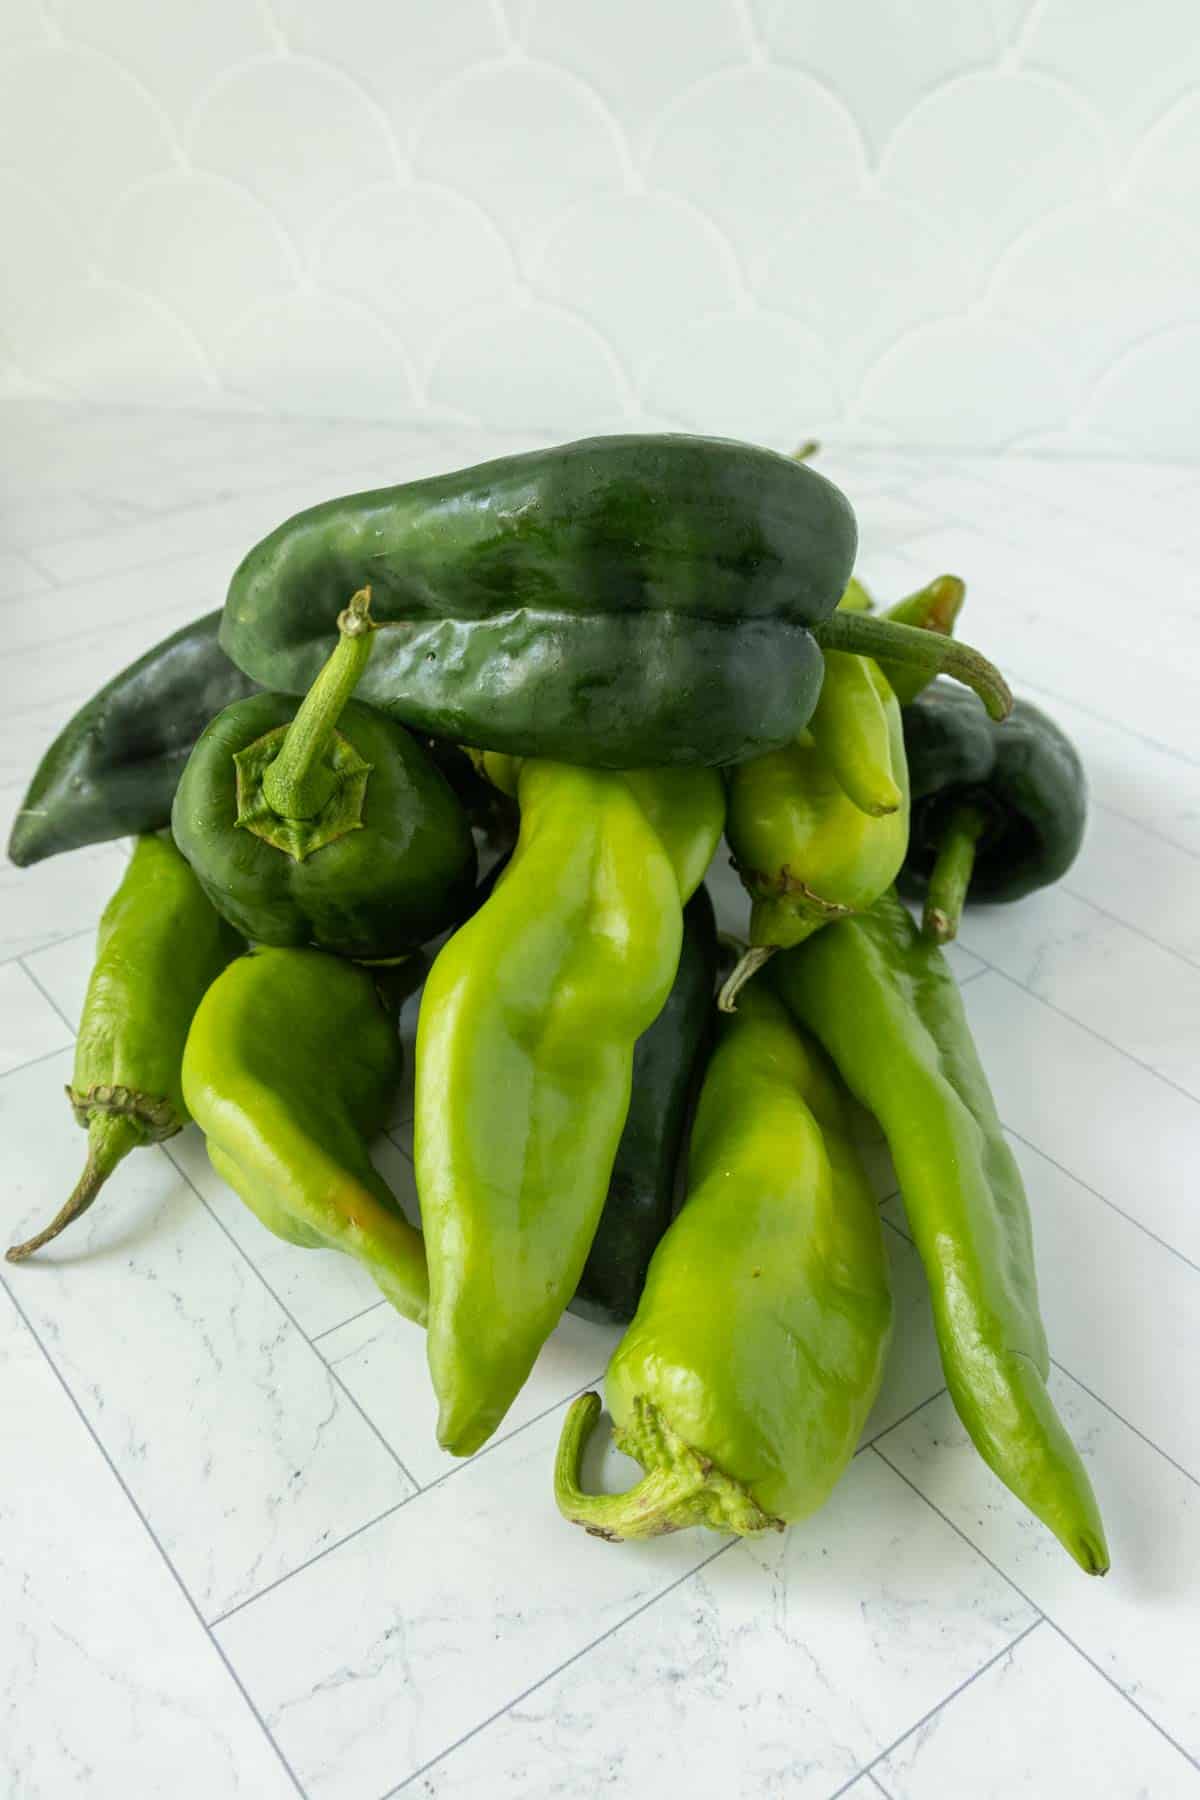 A pile of green peppers on a table.